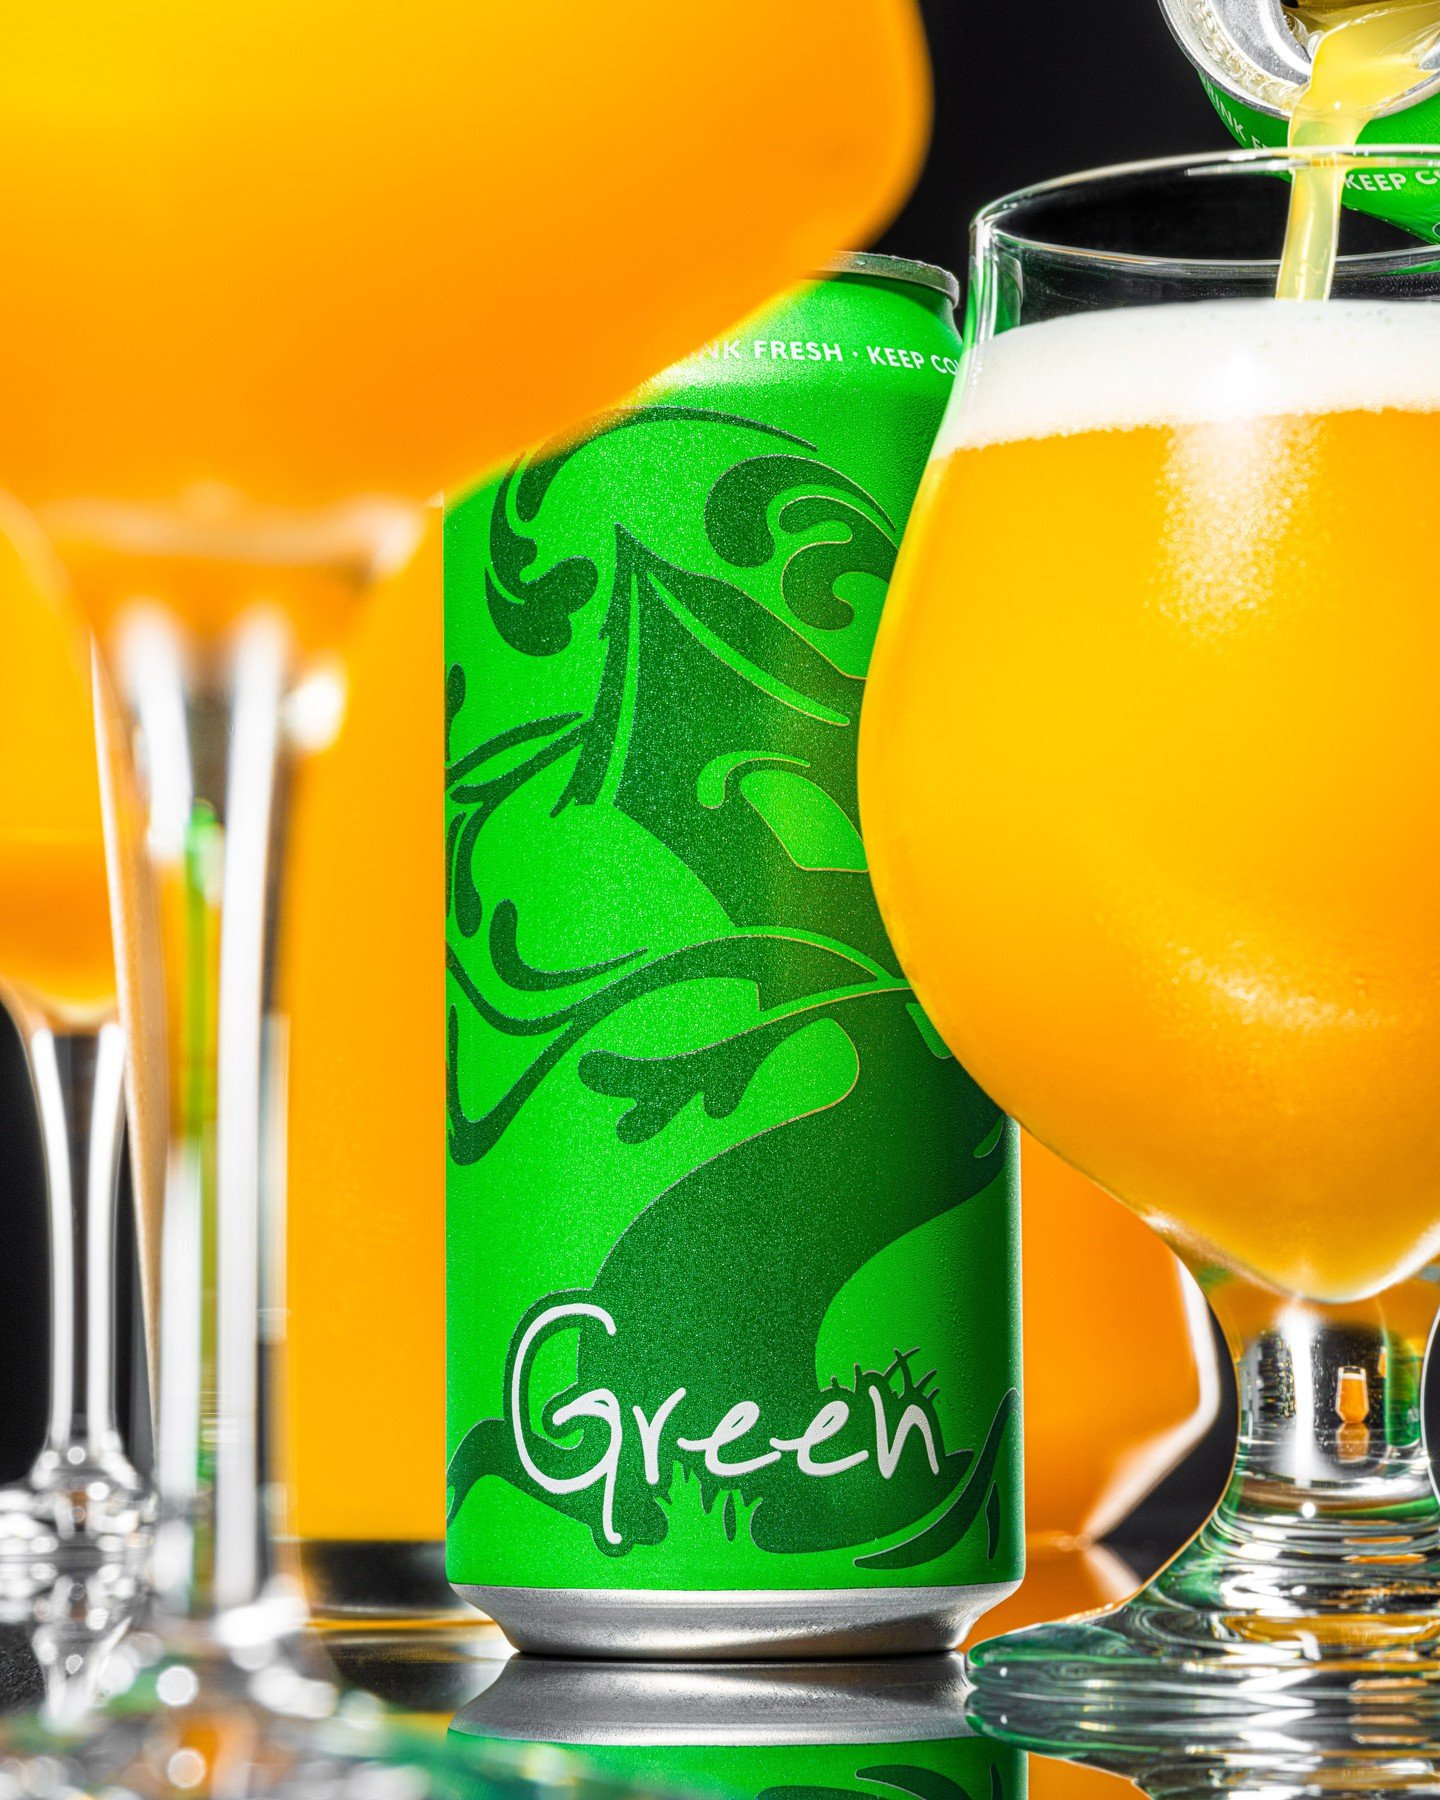 Fresh Green machine is coming at ya today.

Thanks to over a decade of working to understand and extract the best character possible from Galaxy hops, it tastes absolutely sublime. 

#productphotography #productphotodaily #photography #craftbeer #tre